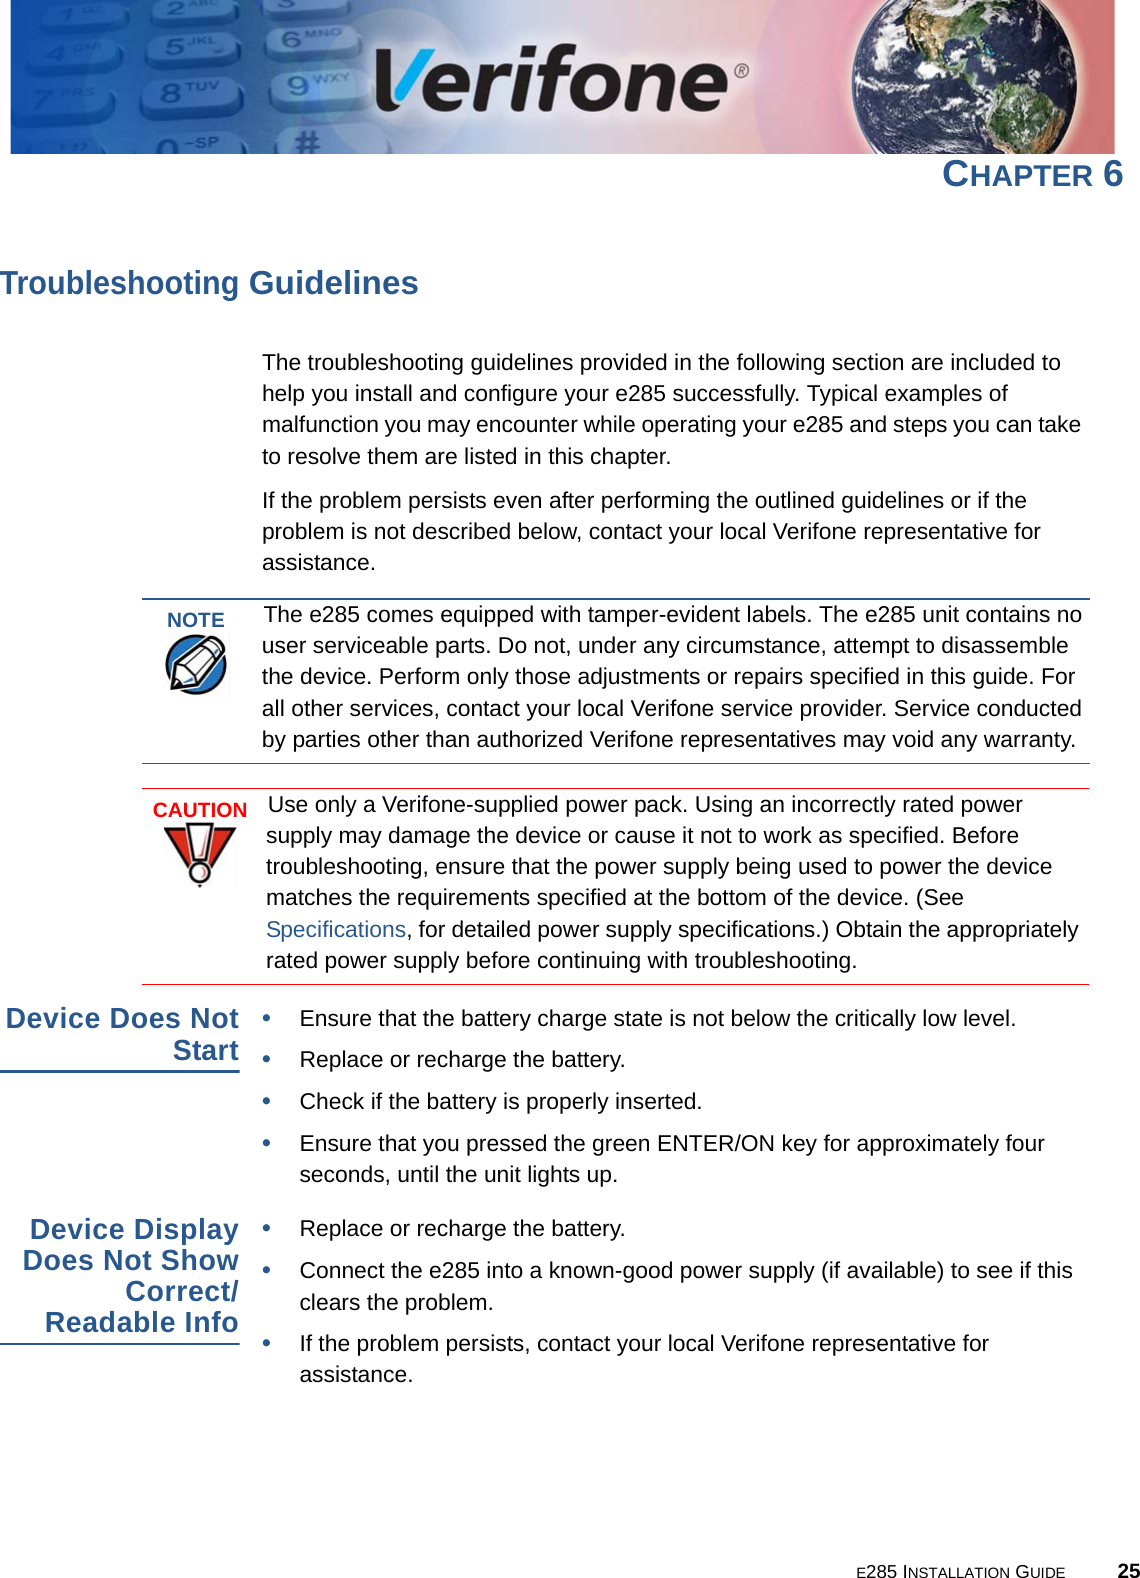 E285 INSTALLATION GUIDE 25CHAPTER 6Troubleshooting GuidelinesThe troubleshooting guidelines provided in the following section are included to help you install and configure your e285 successfully. Typical examples of malfunction you may encounter while operating your e285 and steps you can take to resolve them are listed in this chapter. If the problem persists even after performing the outlined guidelines or if the problem is not described below, contact your local Verifone representative for assistance. Device Does Not Start•Ensure that the battery charge state is not below the critically low level. •Replace or recharge the battery.•Check if the battery is properly inserted. •Ensure that you pressed the green ENTER/ON key for approximately four seconds, until the unit lights up.Device Display Does Not Show Correct/Readable Info•Replace or recharge the battery.•Connect the e285 into a known-good power supply (if available) to see if this clears the problem.•If the problem persists, contact your local Verifone representative for assistance.NOTEThe e285 comes equipped with tamper-evident labels. The e285 unit contains no user serviceable parts. Do not, under any circumstance, attempt to disassemble the device. Perform only those adjustments or repairs specified in this guide. For all other services, contact your local Verifone service provider. Service conducted by parties other than authorized Verifone representatives may void any warranty.CAUTIONUse only a Verifone-supplied power pack. Using an incorrectly rated power supply may damage the device or cause it not to work as specified. Before troubleshooting, ensure that the power supply being used to power the device matches the requirements specified at the bottom of the device. (See Specifications, for detailed power supply specifications.) Obtain the appropriately rated power supply before continuing with troubleshooting.